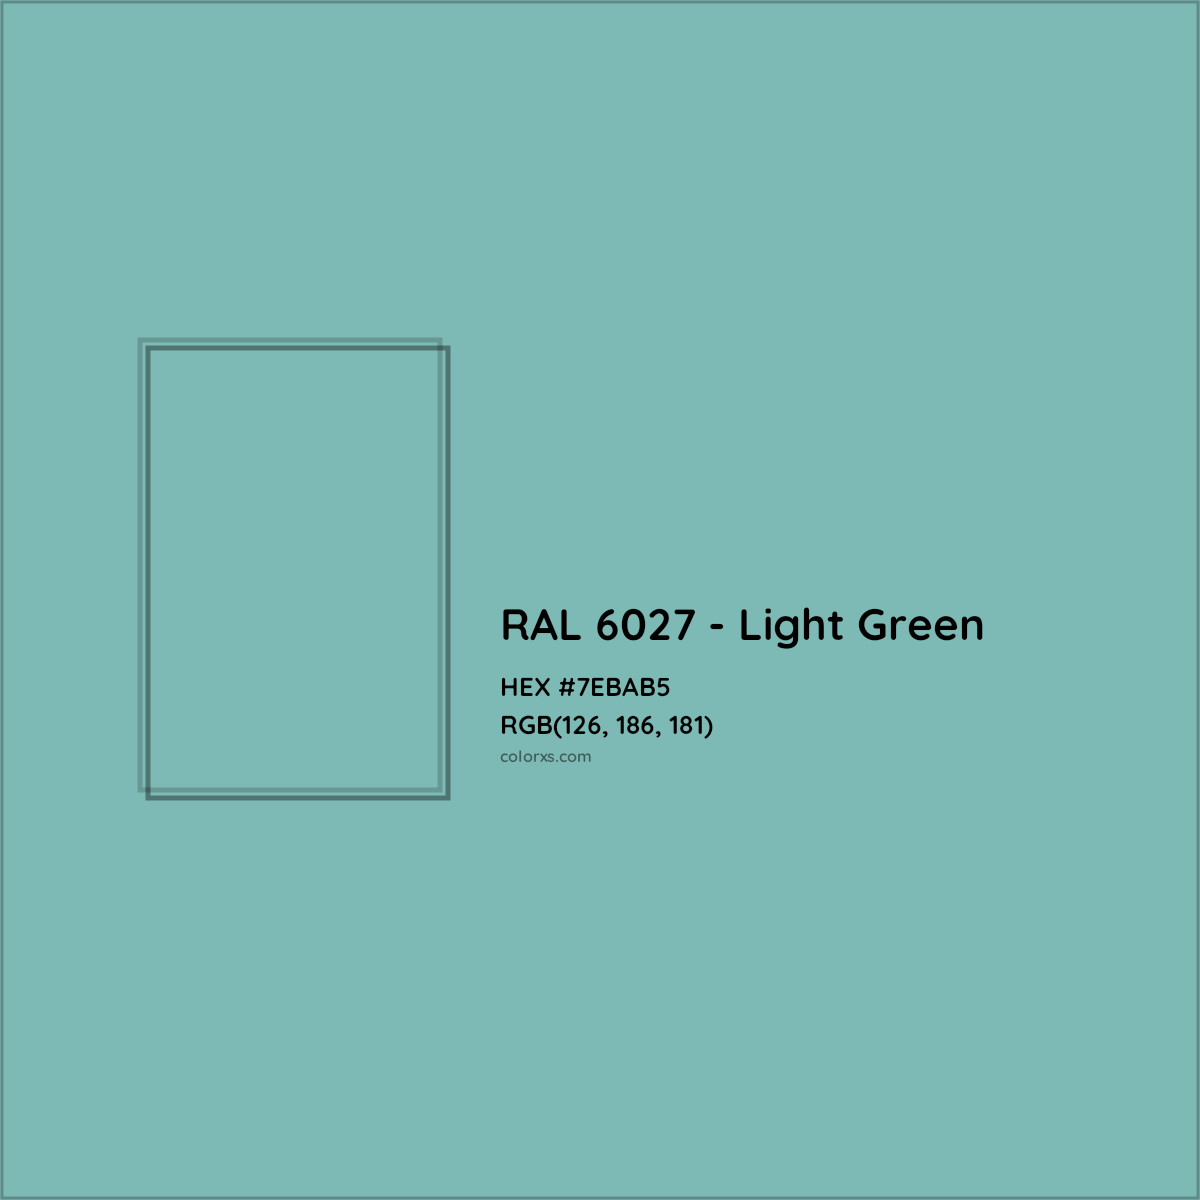 HEX #7EBAB5 RAL 6027 - Light Green CMS RAL Classic - Color Code